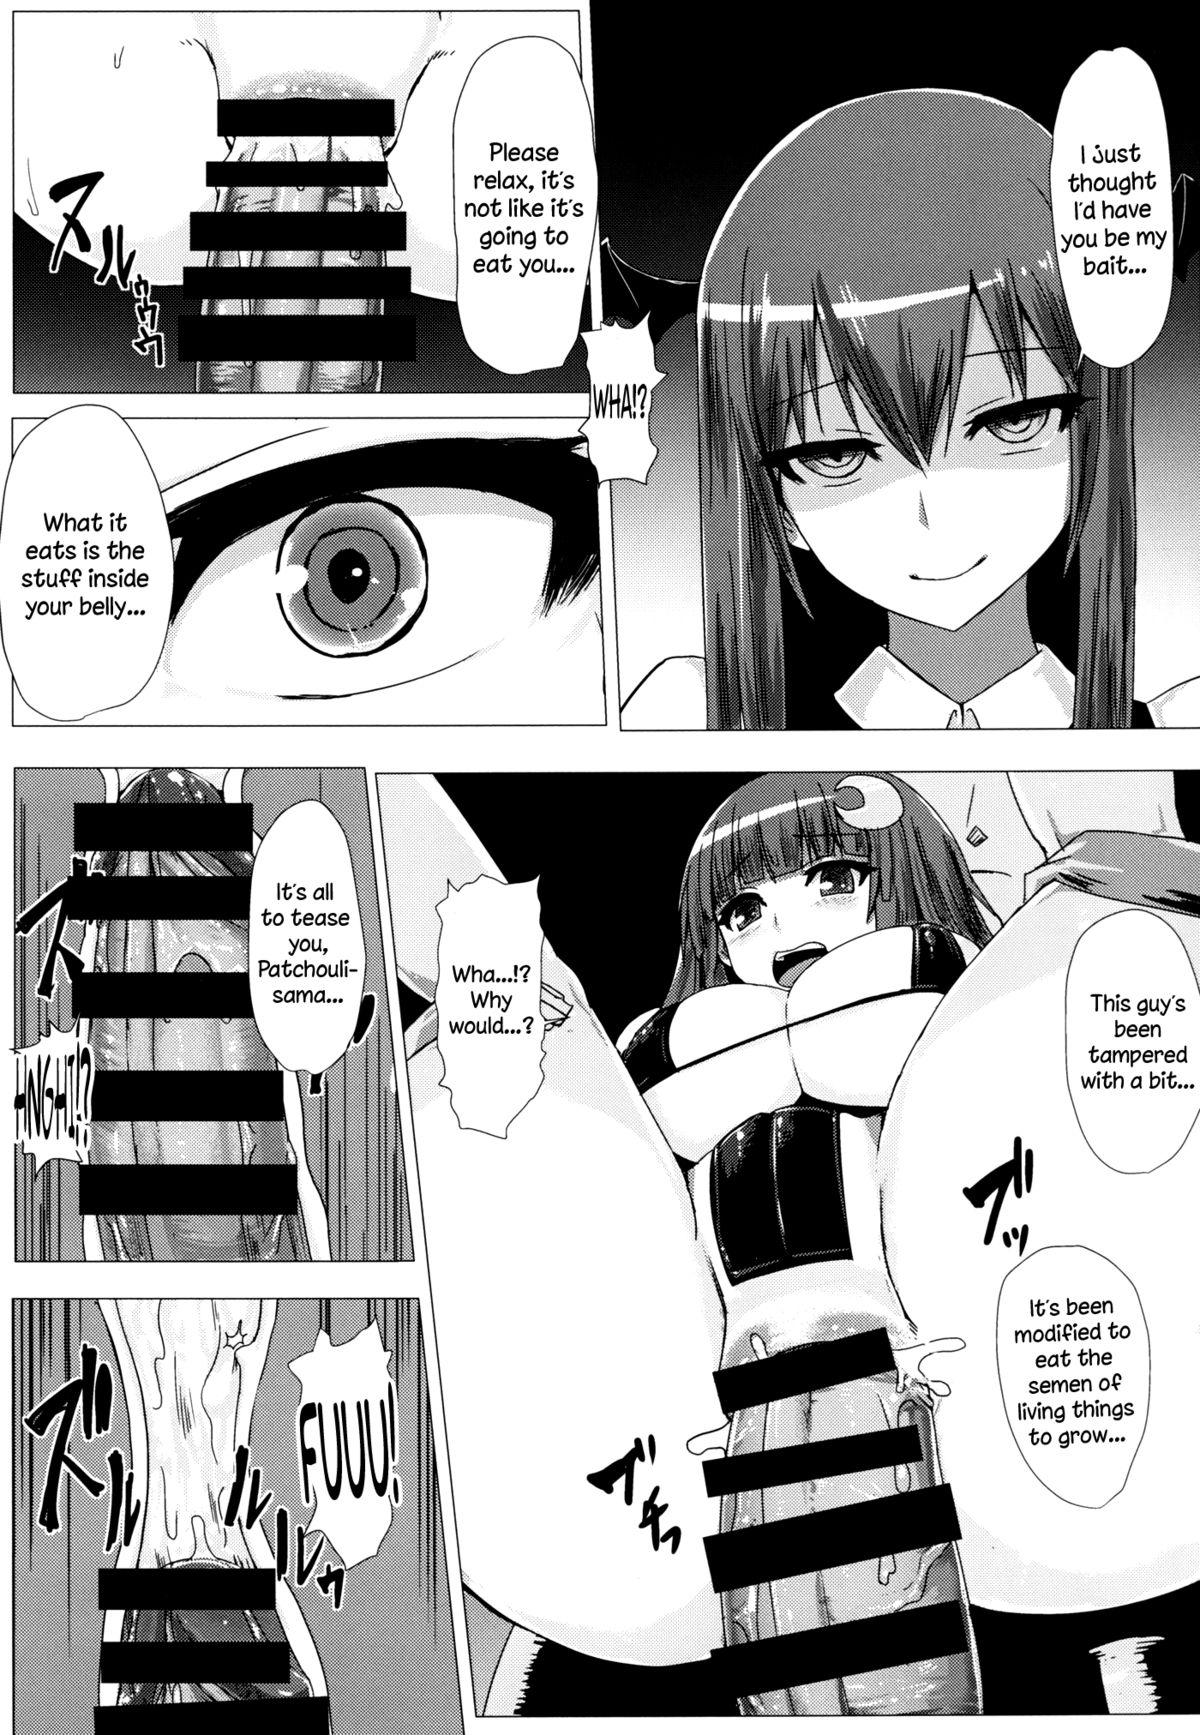 Latin Shiri Pache Pache | Ass Patchy Patchy - Touhou project Bang Bros - Page 10